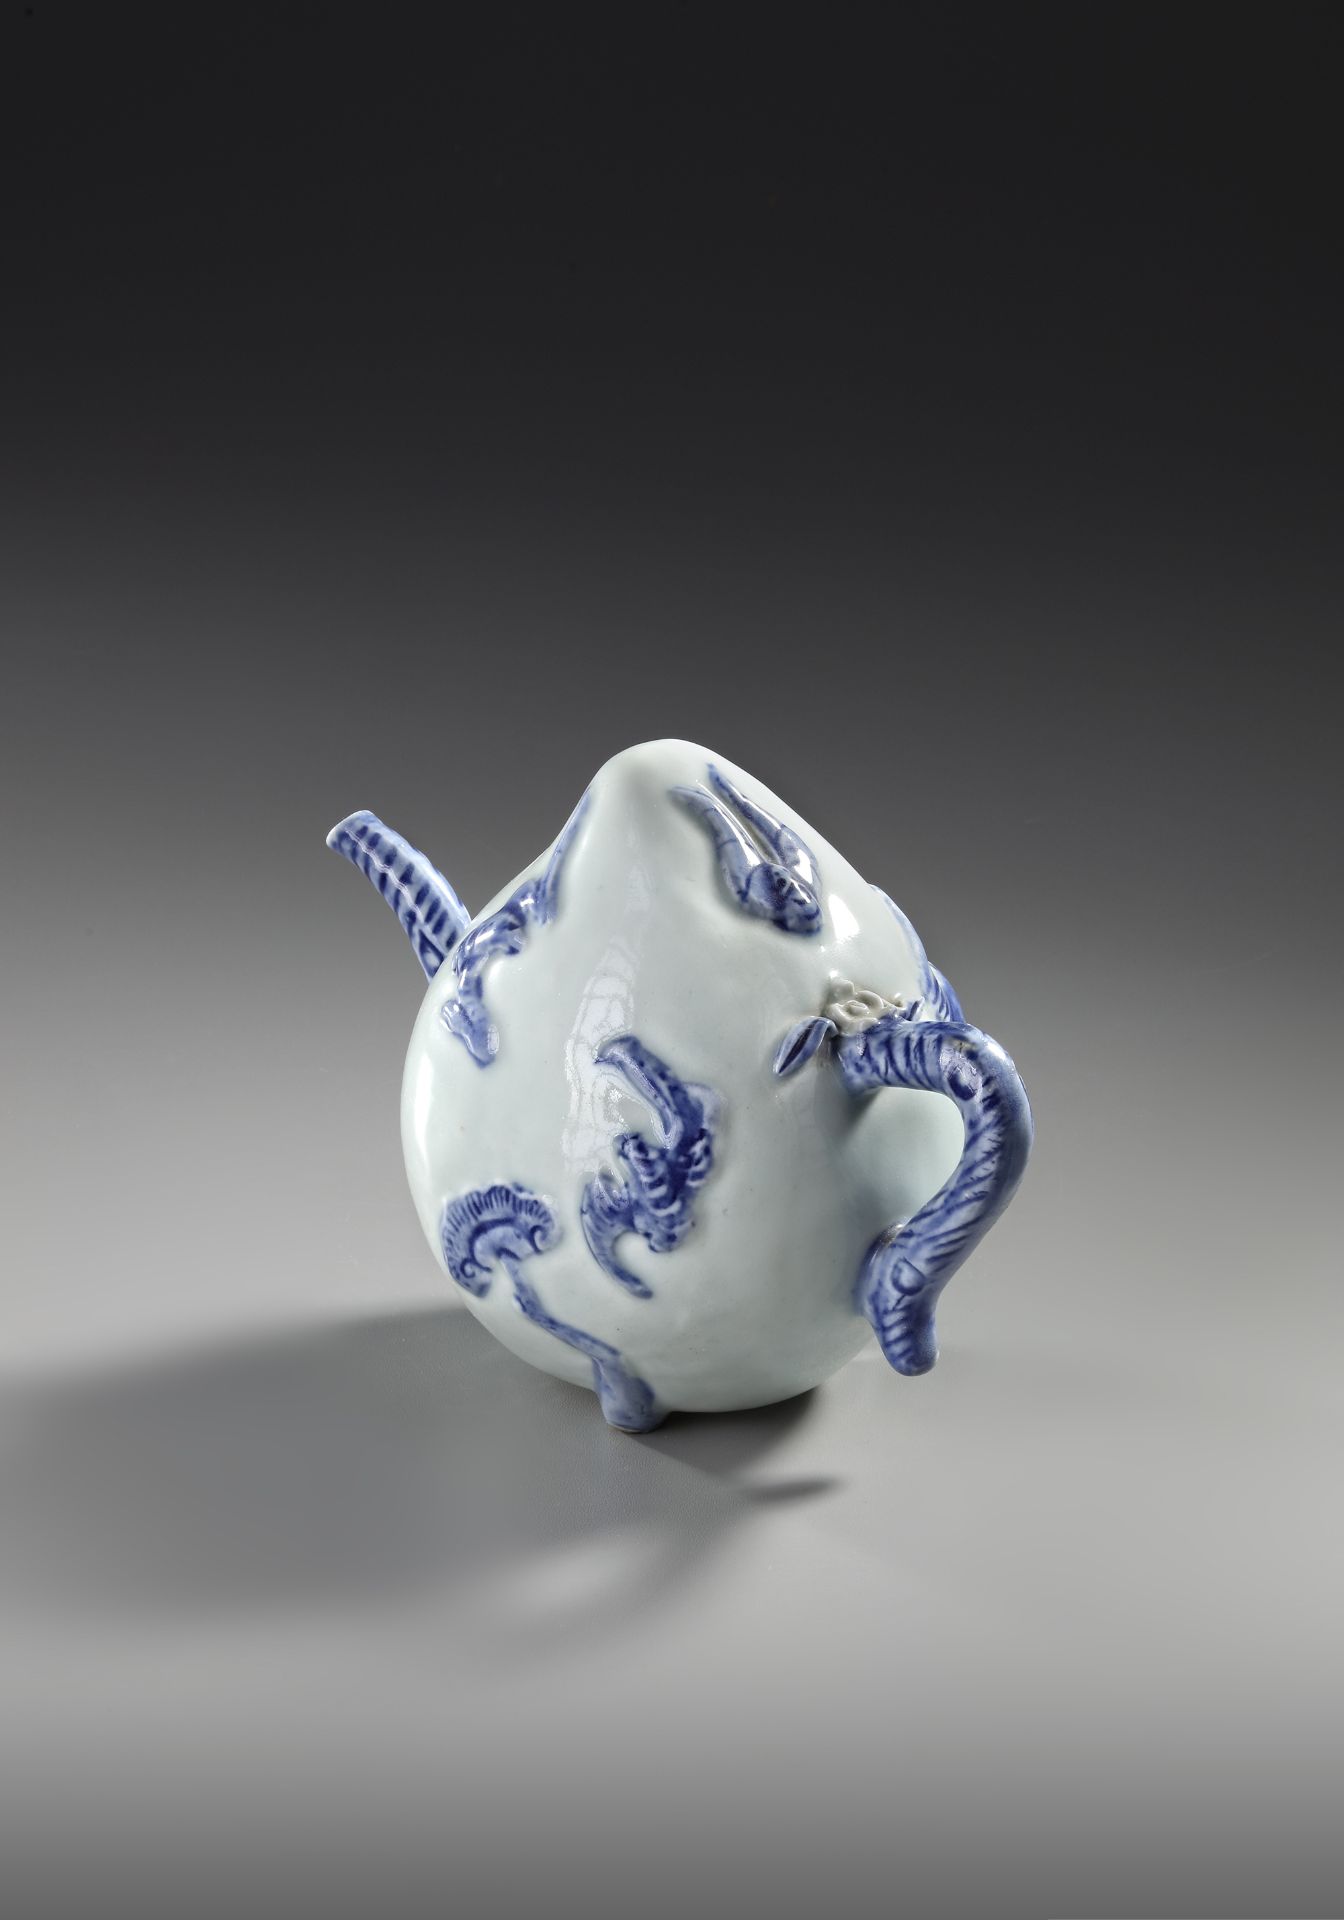 A CHINESE BLUE AND WHITE-GLAZED PEACH-FORM 'CADOGAN' TEAPOT, 19TH CENTURY - Image 3 of 4